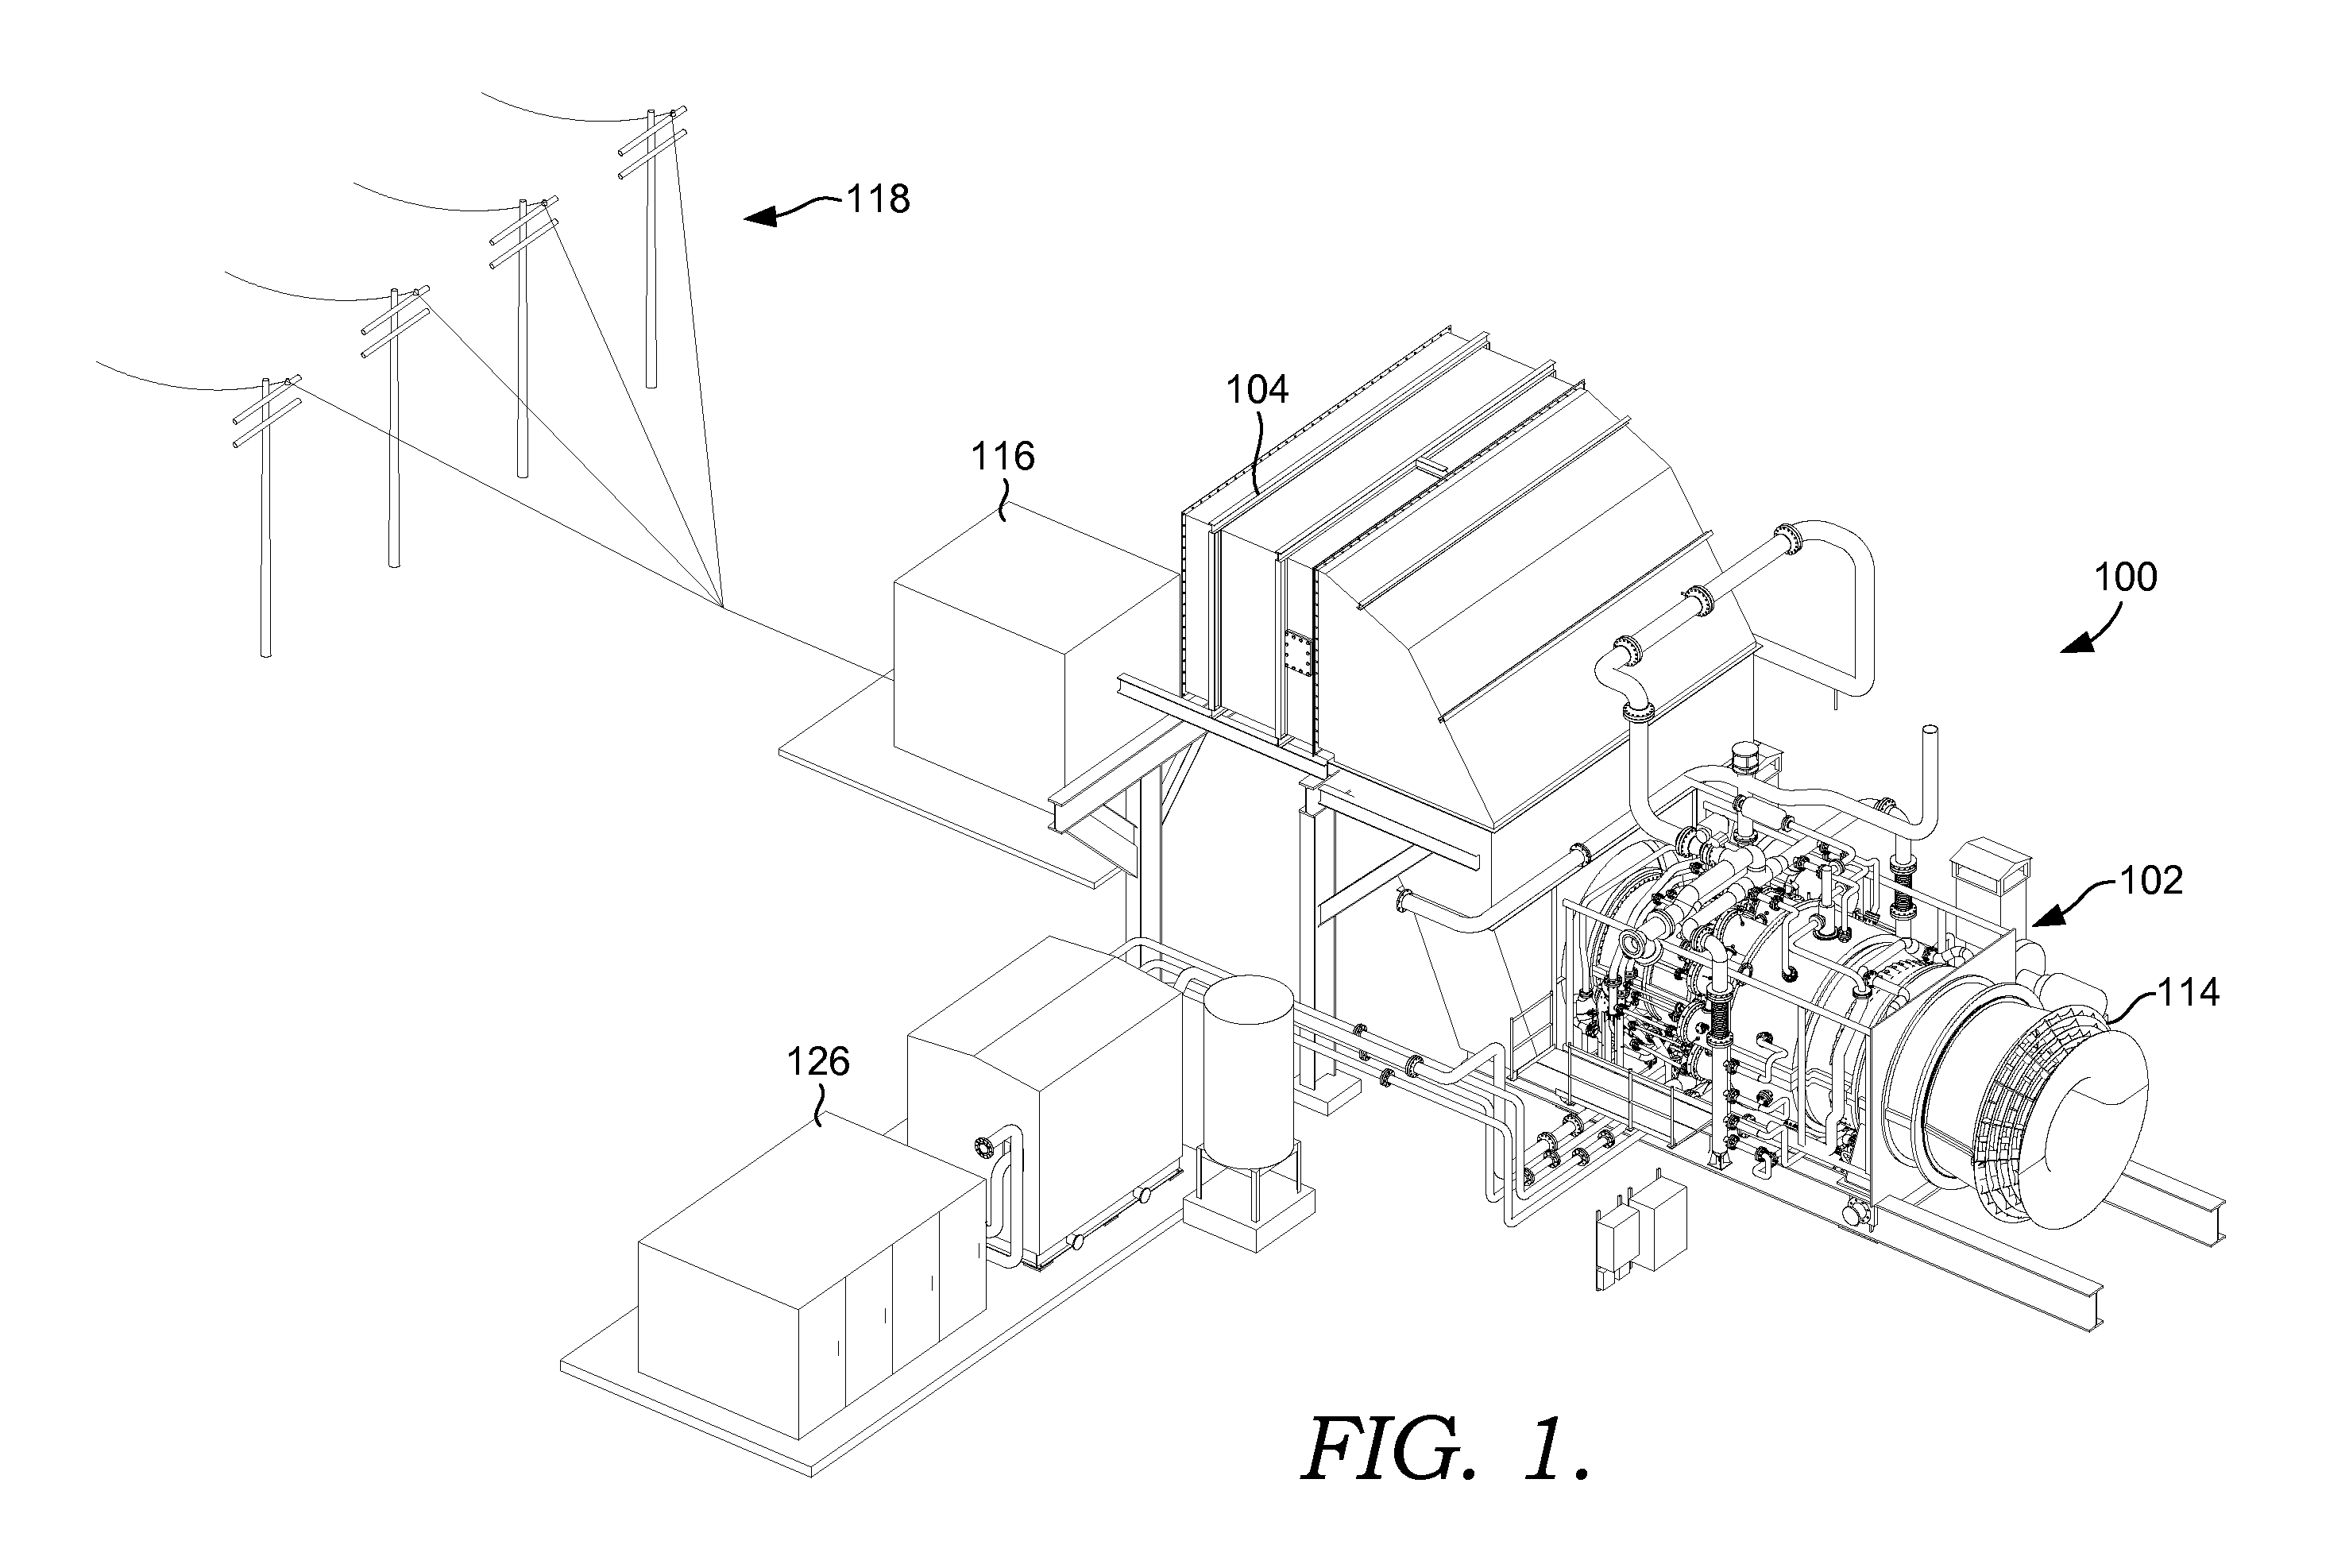 Load rejection and recovery using a secondary fuel nozzle